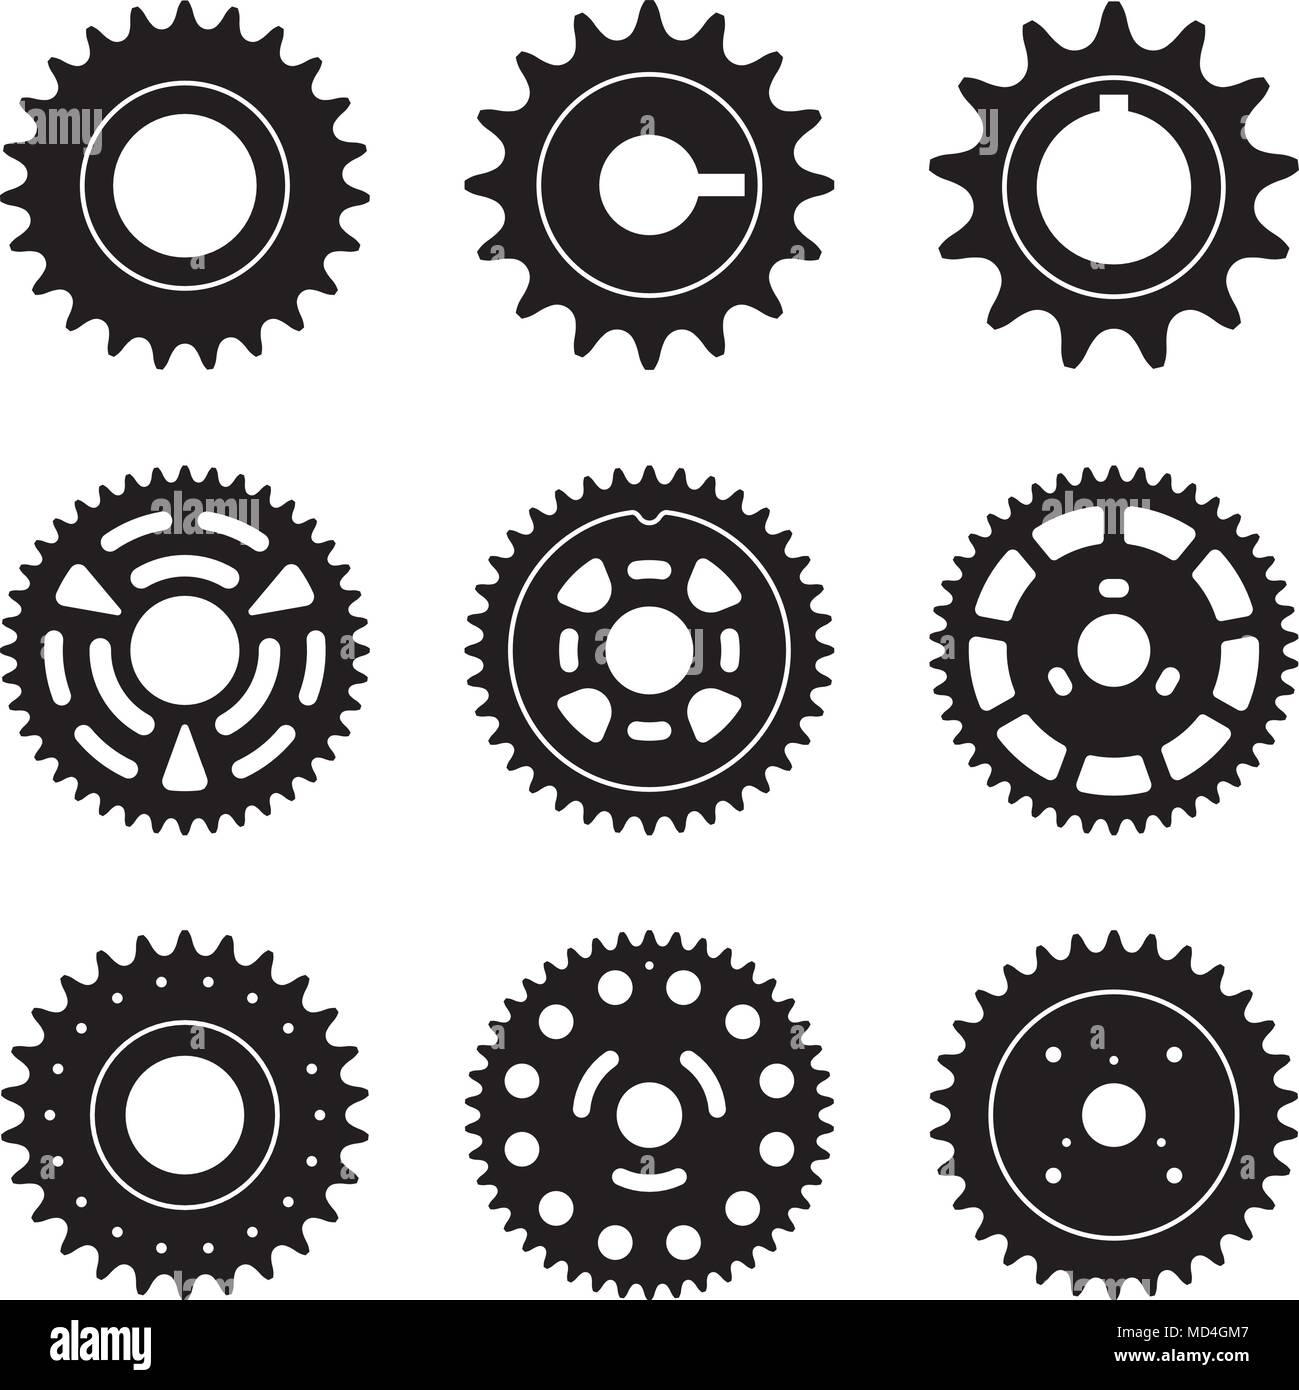 Different kinds of sprocket wheels. Silhouette vector Stock Vector